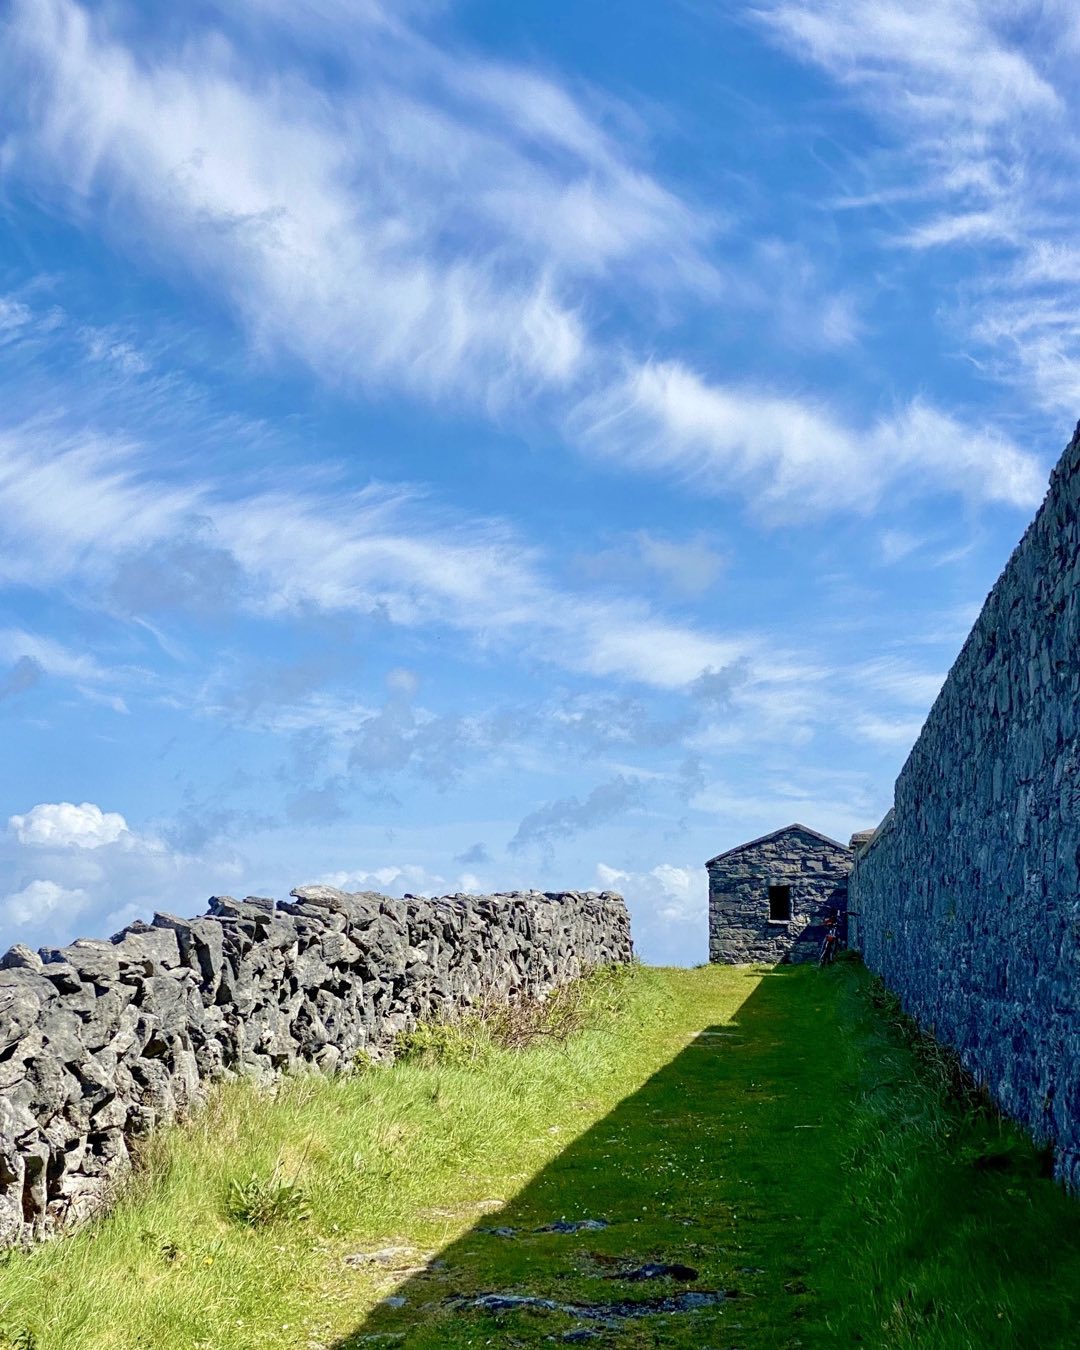 Stone walls and buildings on the bright green landscape are everywhere in Western Ireland. This strong composition by Cindy Orcutt clearly expresses these iconic elements on Inis Mor in the Aran Islands. #ireland #inismoraranislands #westernireland #stonewalls #orcuttphotography